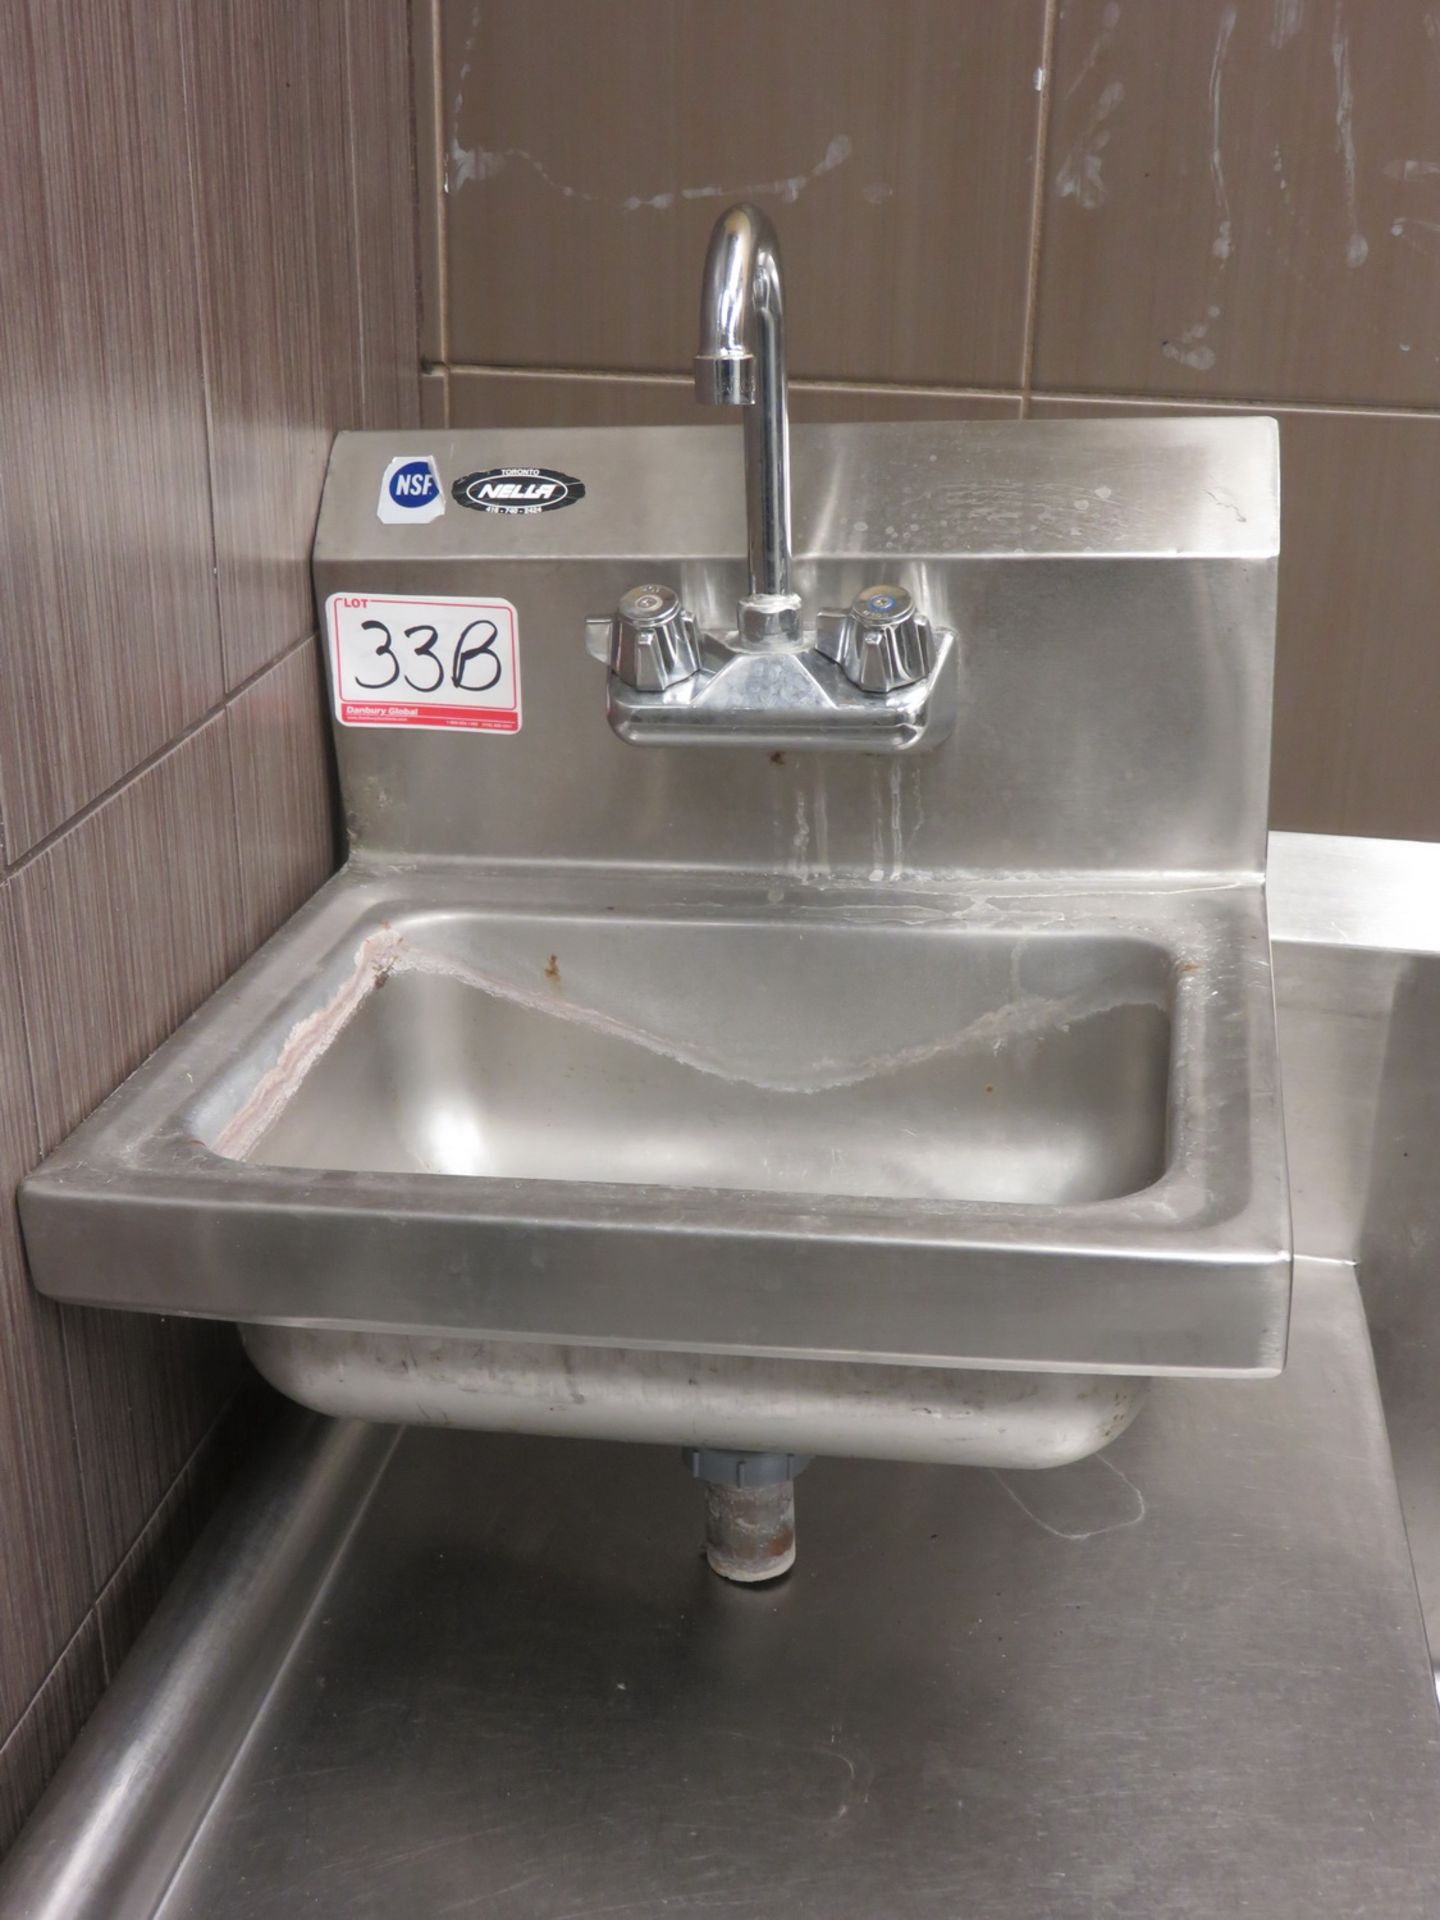 UNITS - NELLA STAINLESS STEEL 15" X 17" WALL MOUNT SINKS (3-UNITS) & (1) STAINLESS 12" X 18" SINK - Image 3 of 3